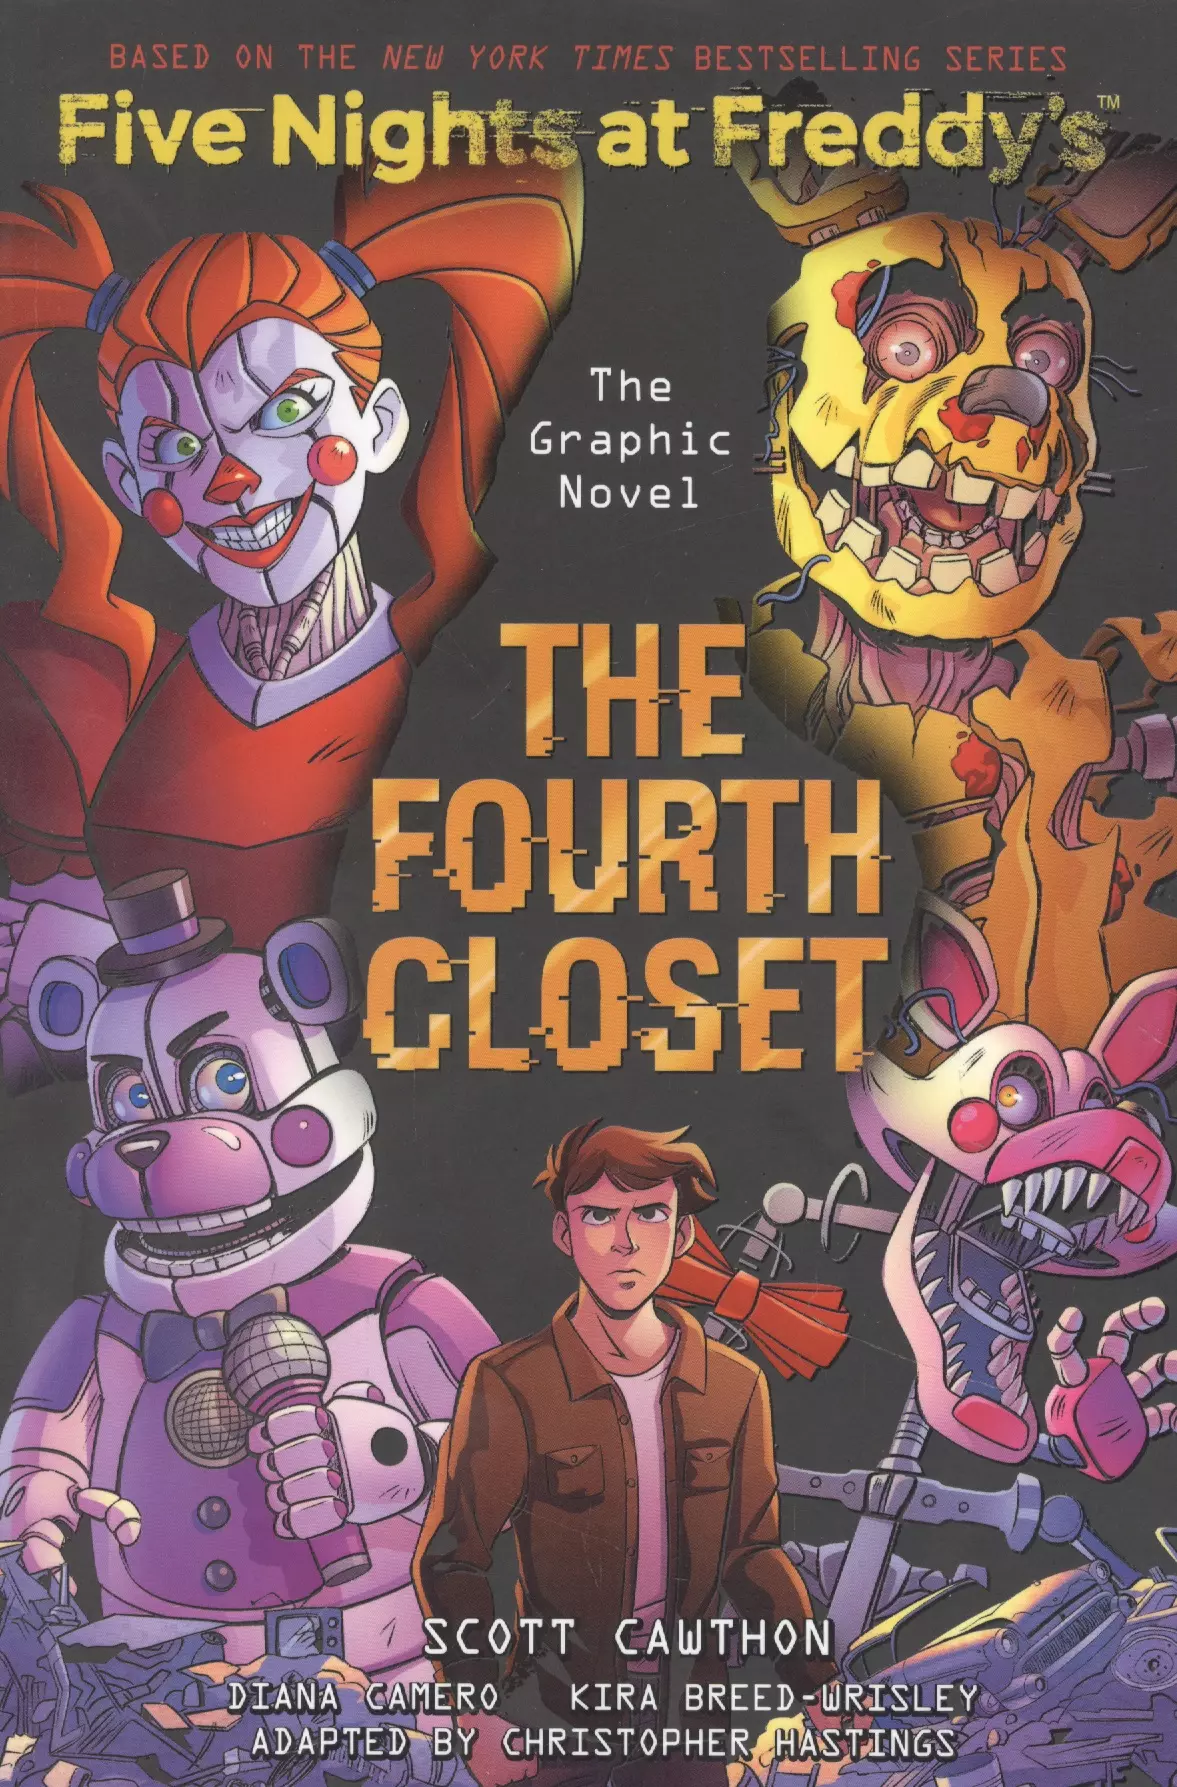 

The Fourth Closet (Five Nights at Freddys Graphic Novel 3)